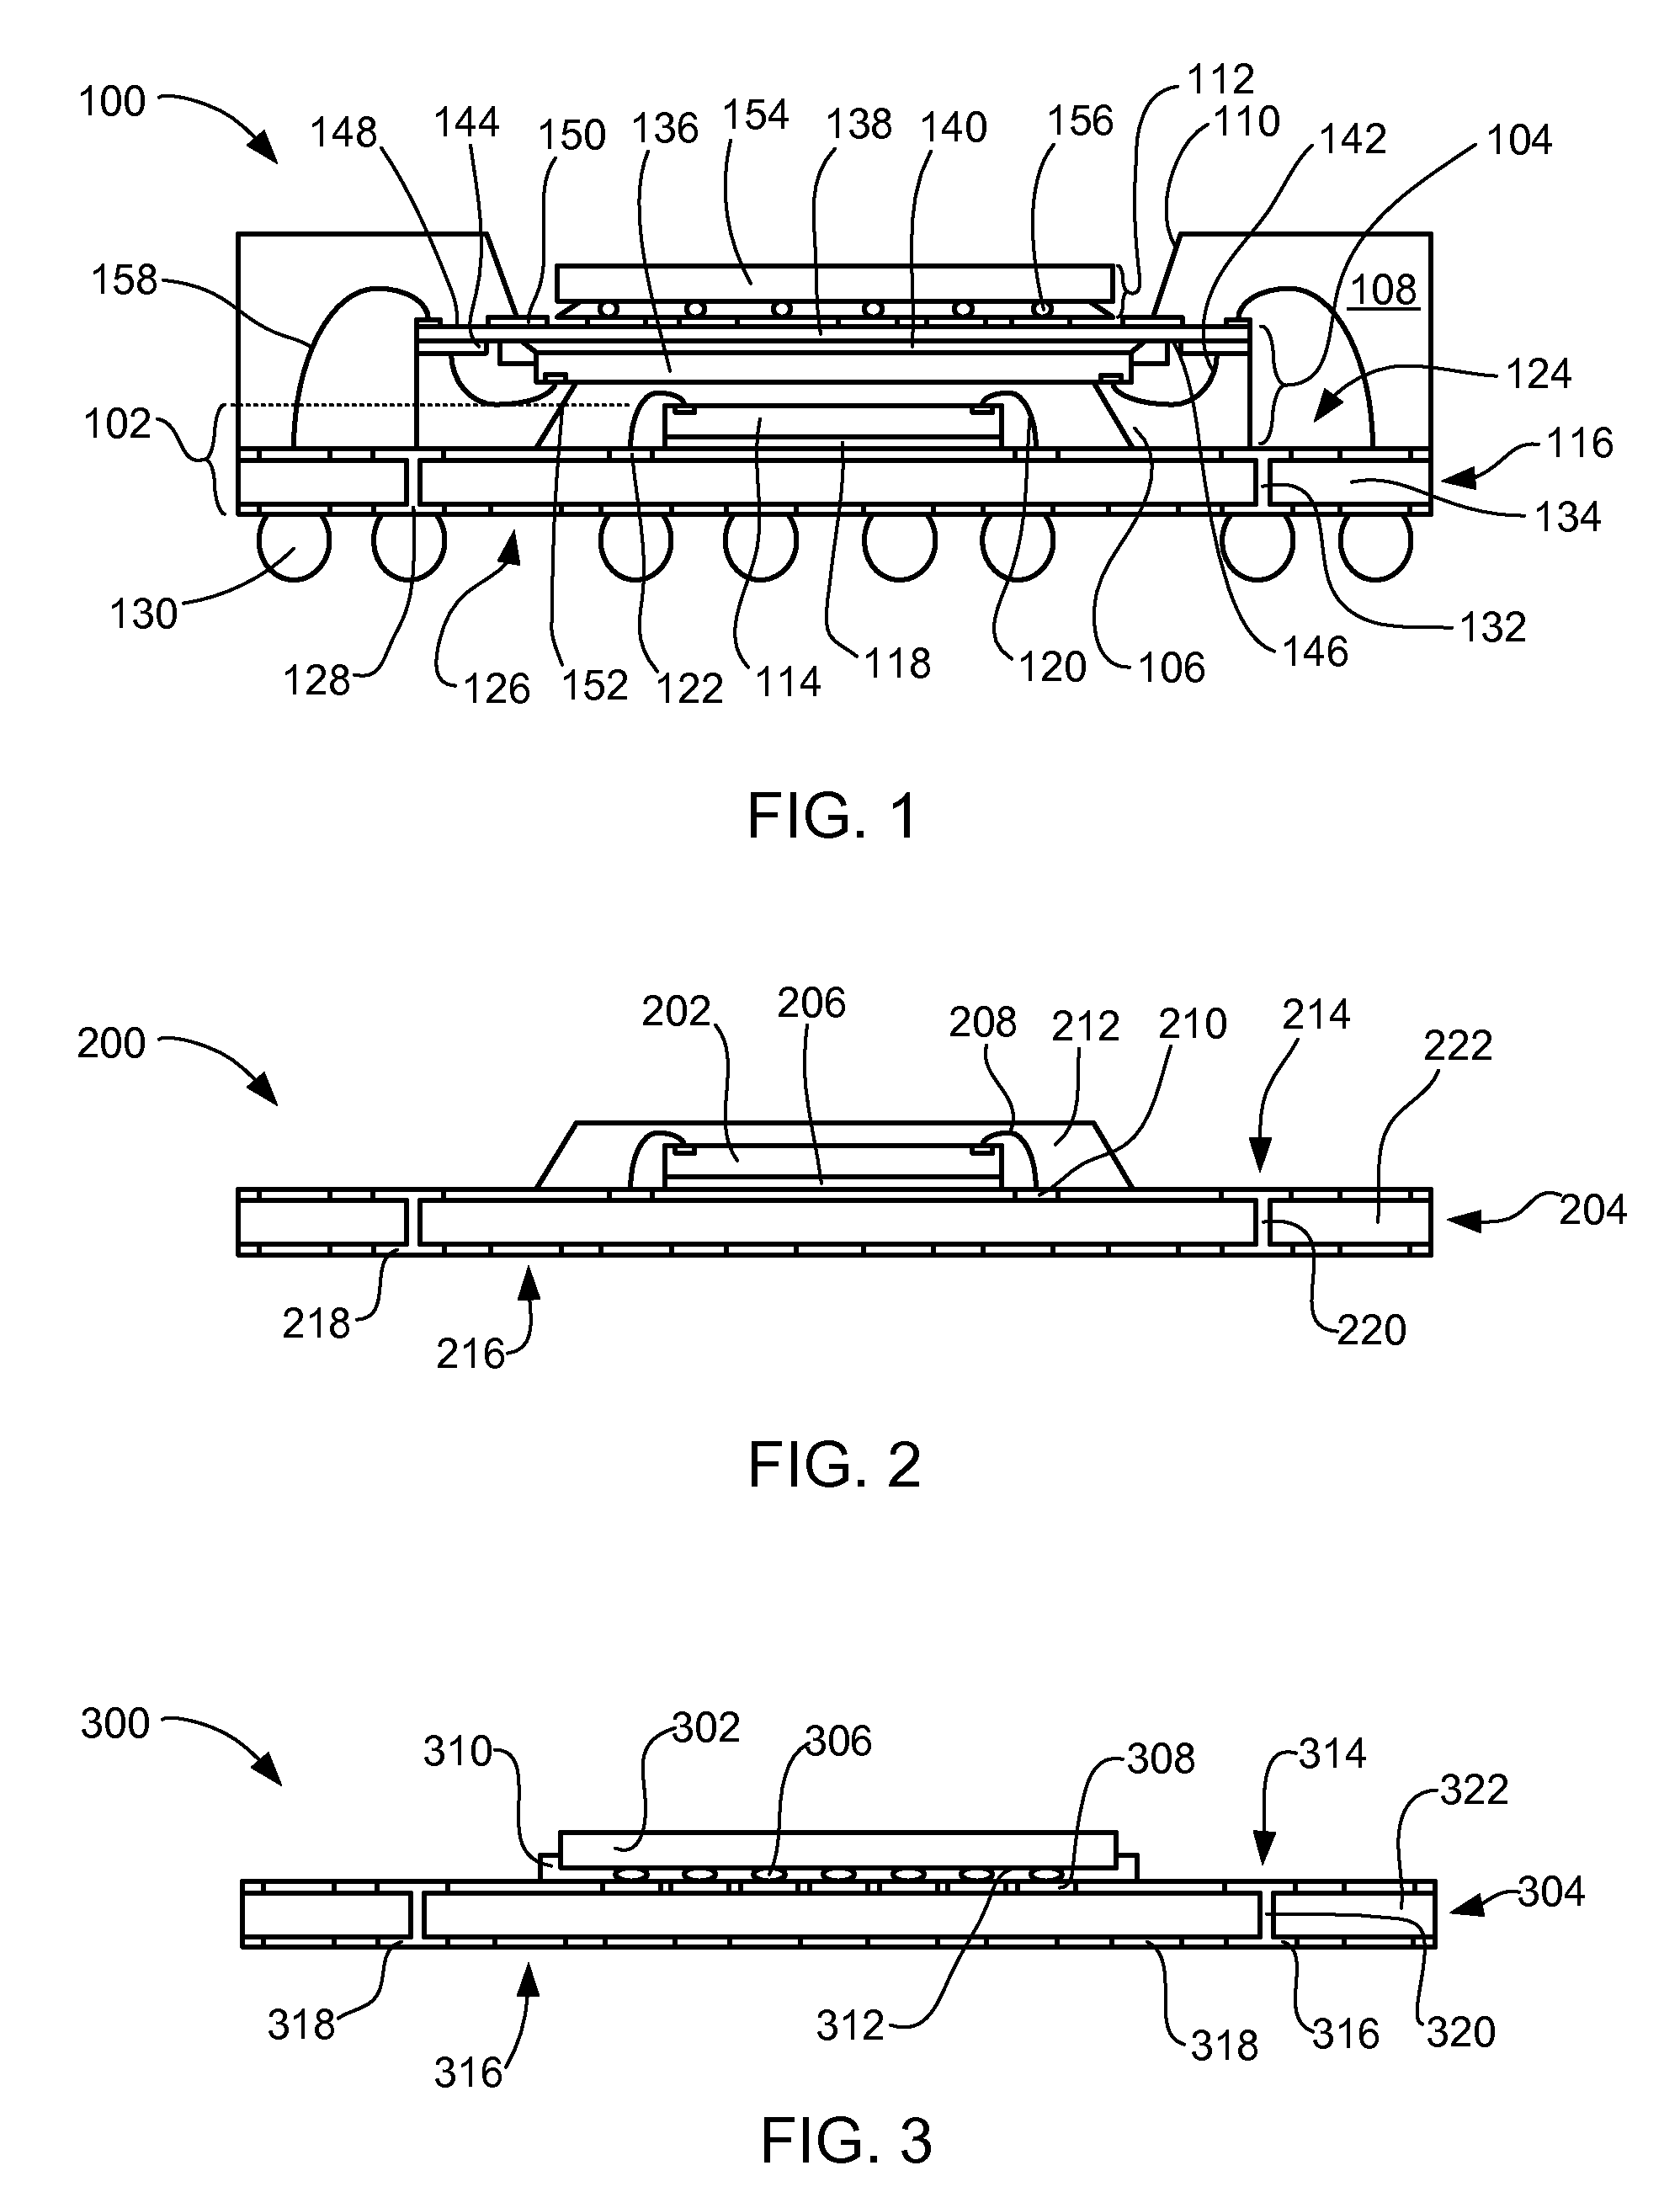 Integrated circuit package-in-package system